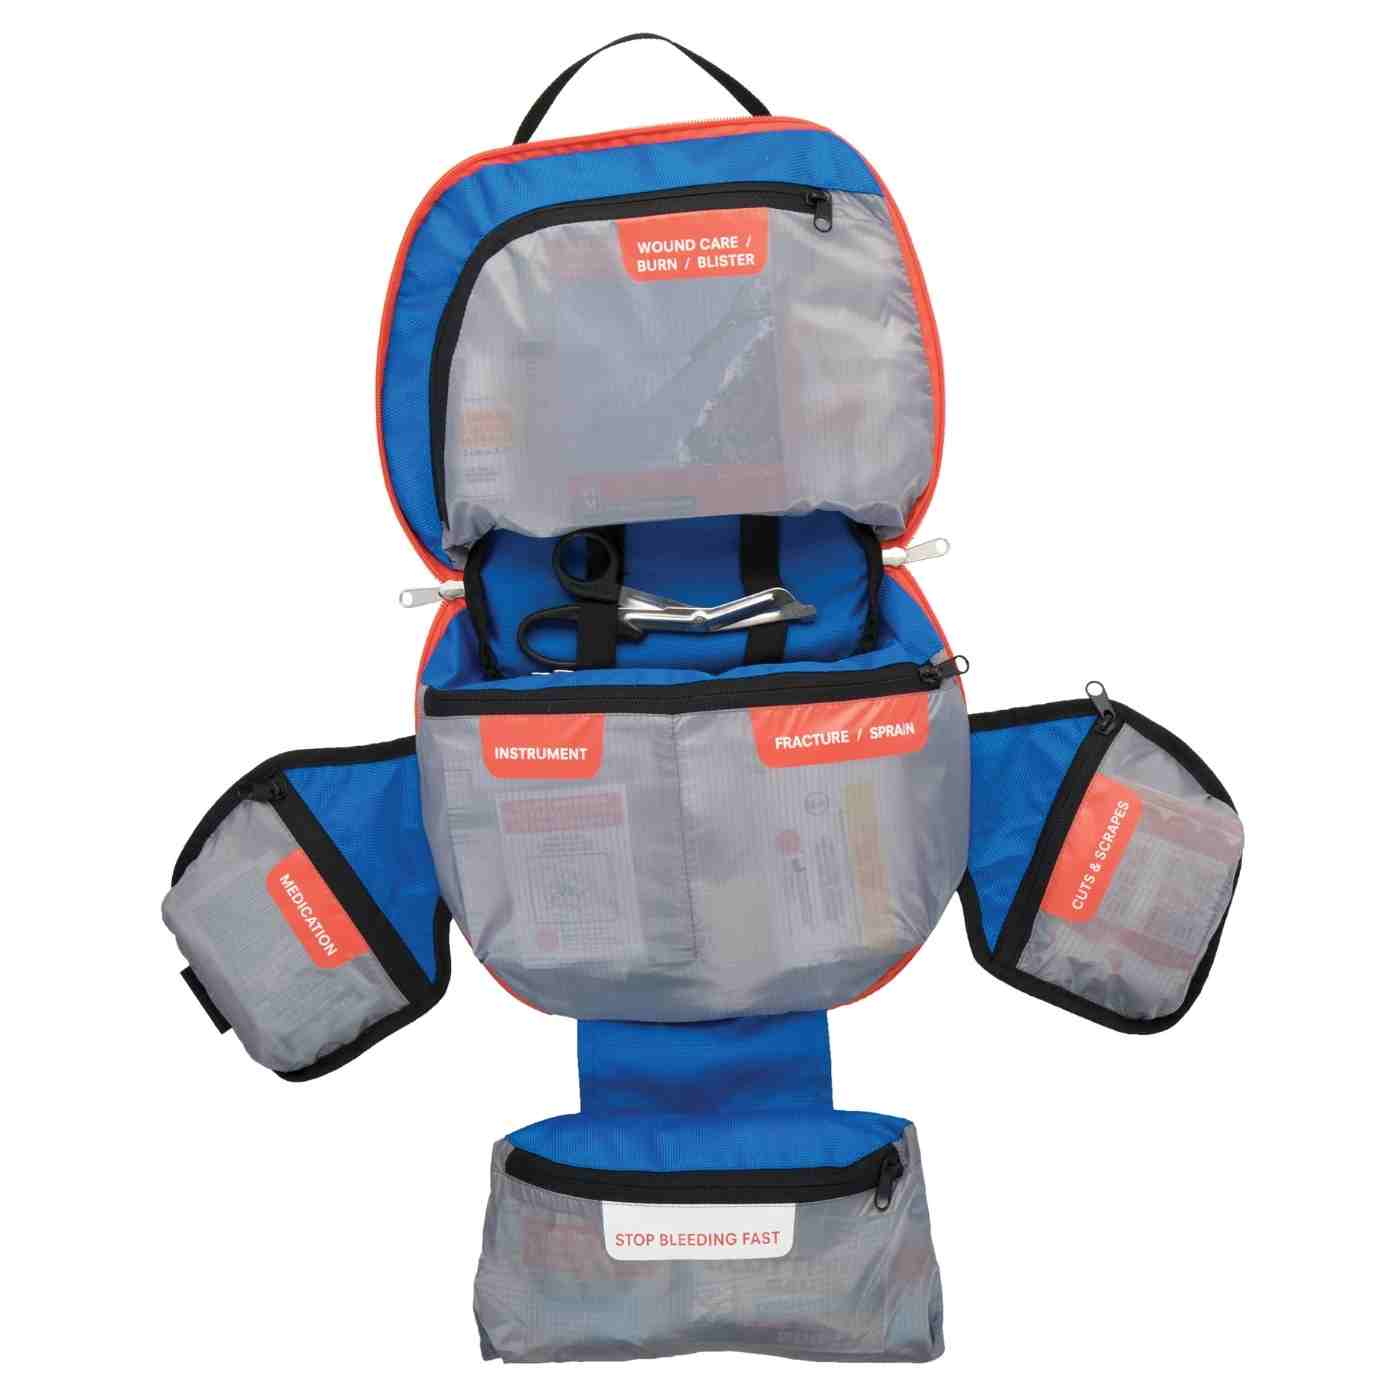 Mountain Series Medical Kit - Guide open